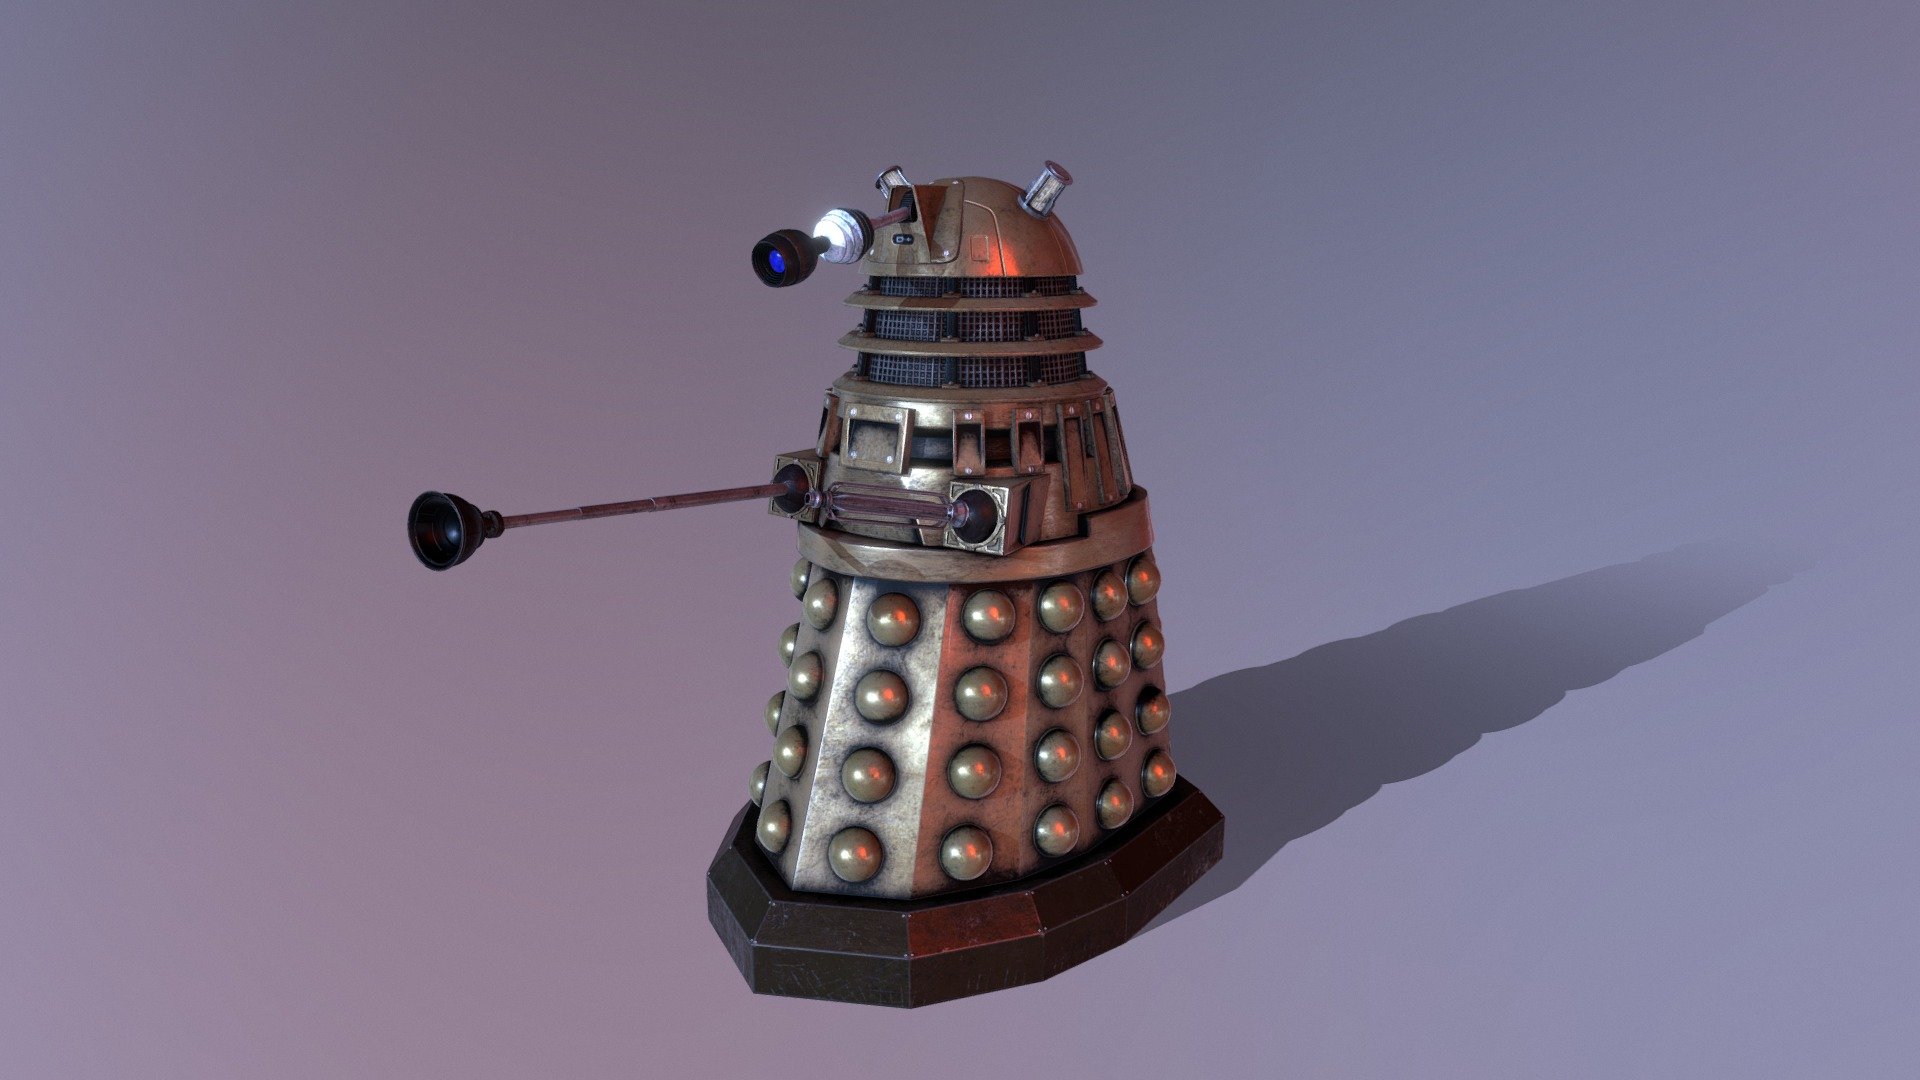 E X T E R M I N A T E !

My animated Dalek from &ldquo;Doctor Who